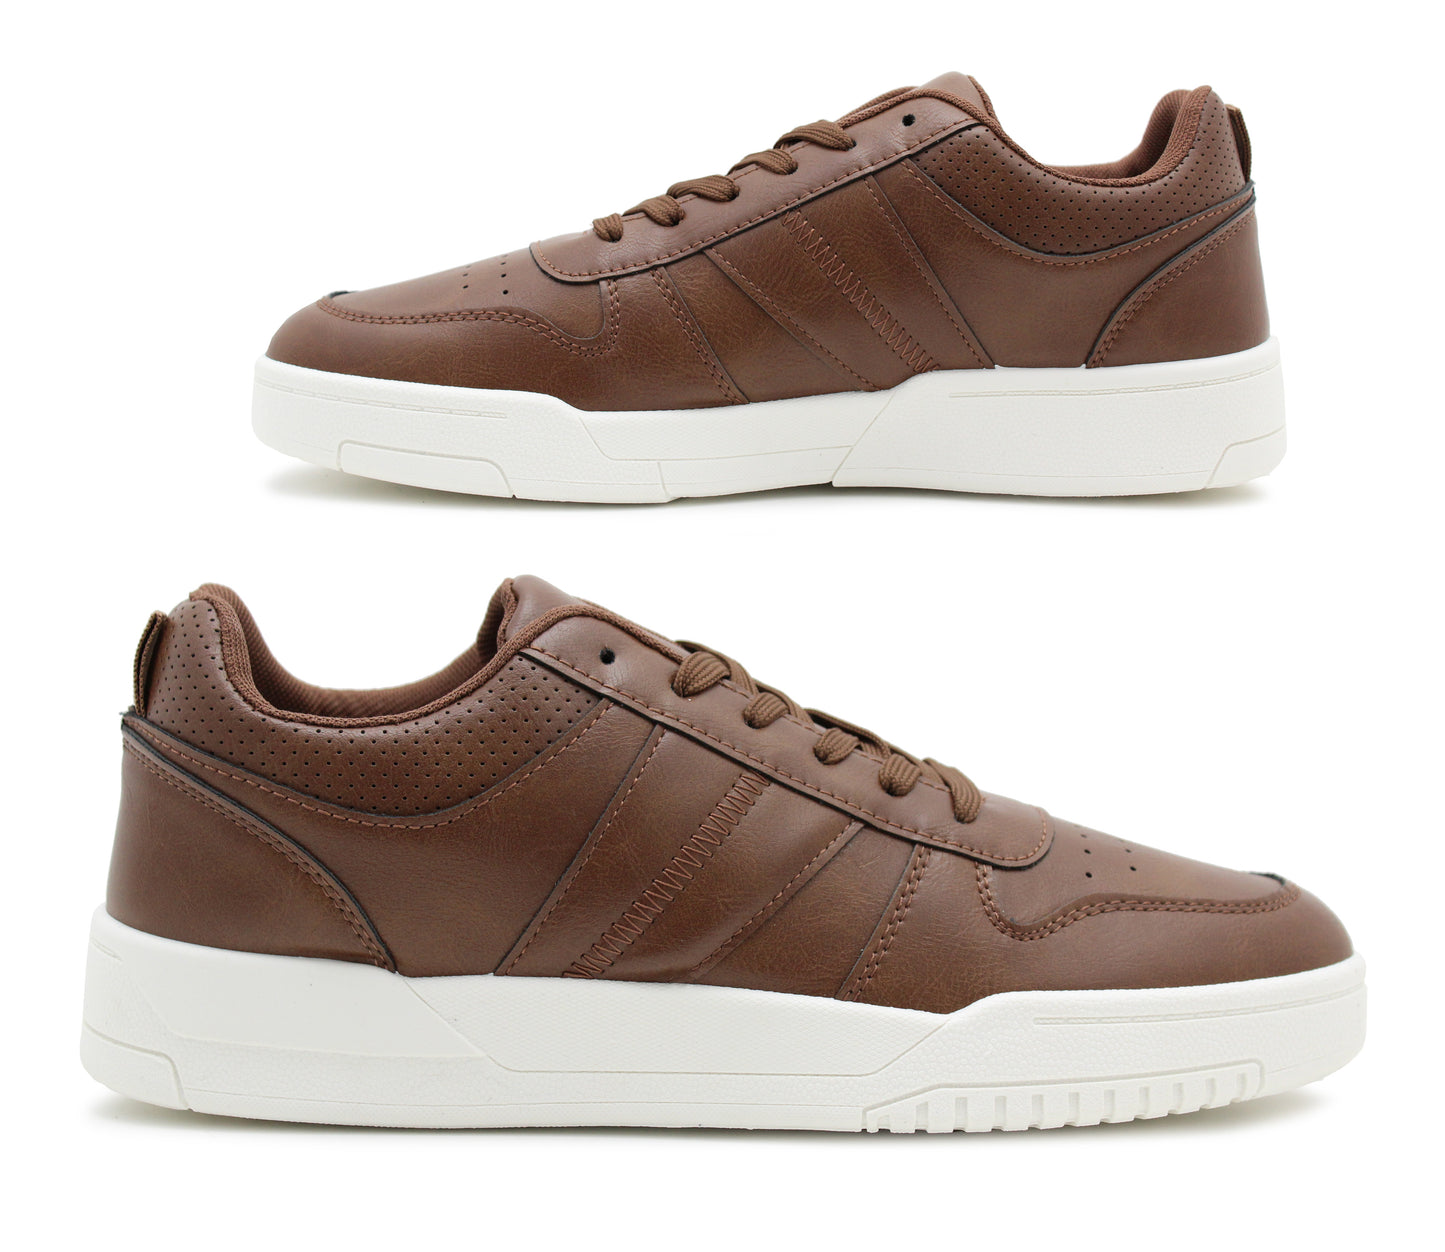 Mens Lace Up Trainers Casual Smart Flat Brown Tan Synthetic Leather Fashion Sports Sneakers